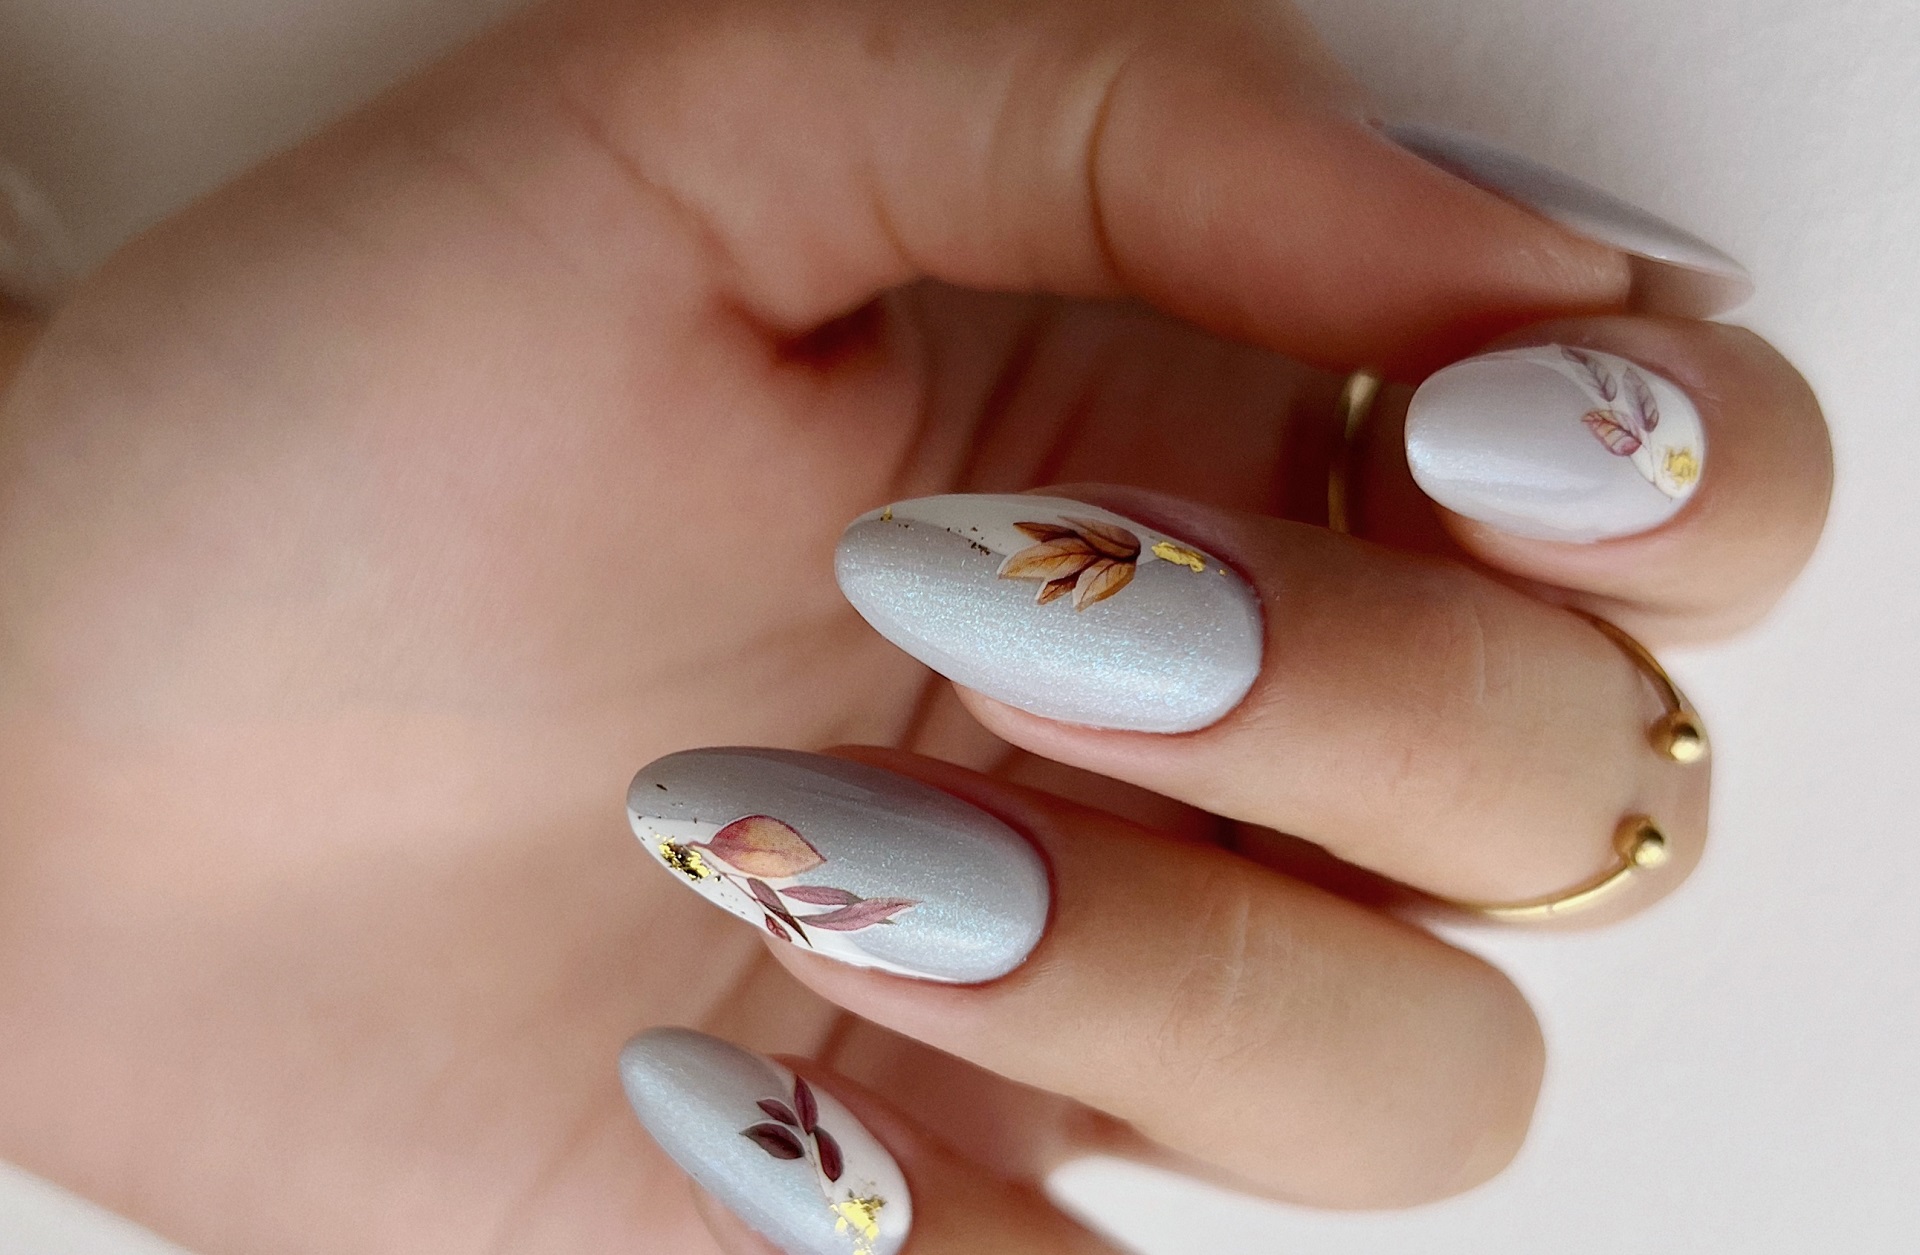 What nails are you sporting today? | Page 1257 | Salon Geek - Salon  Professionals Forum